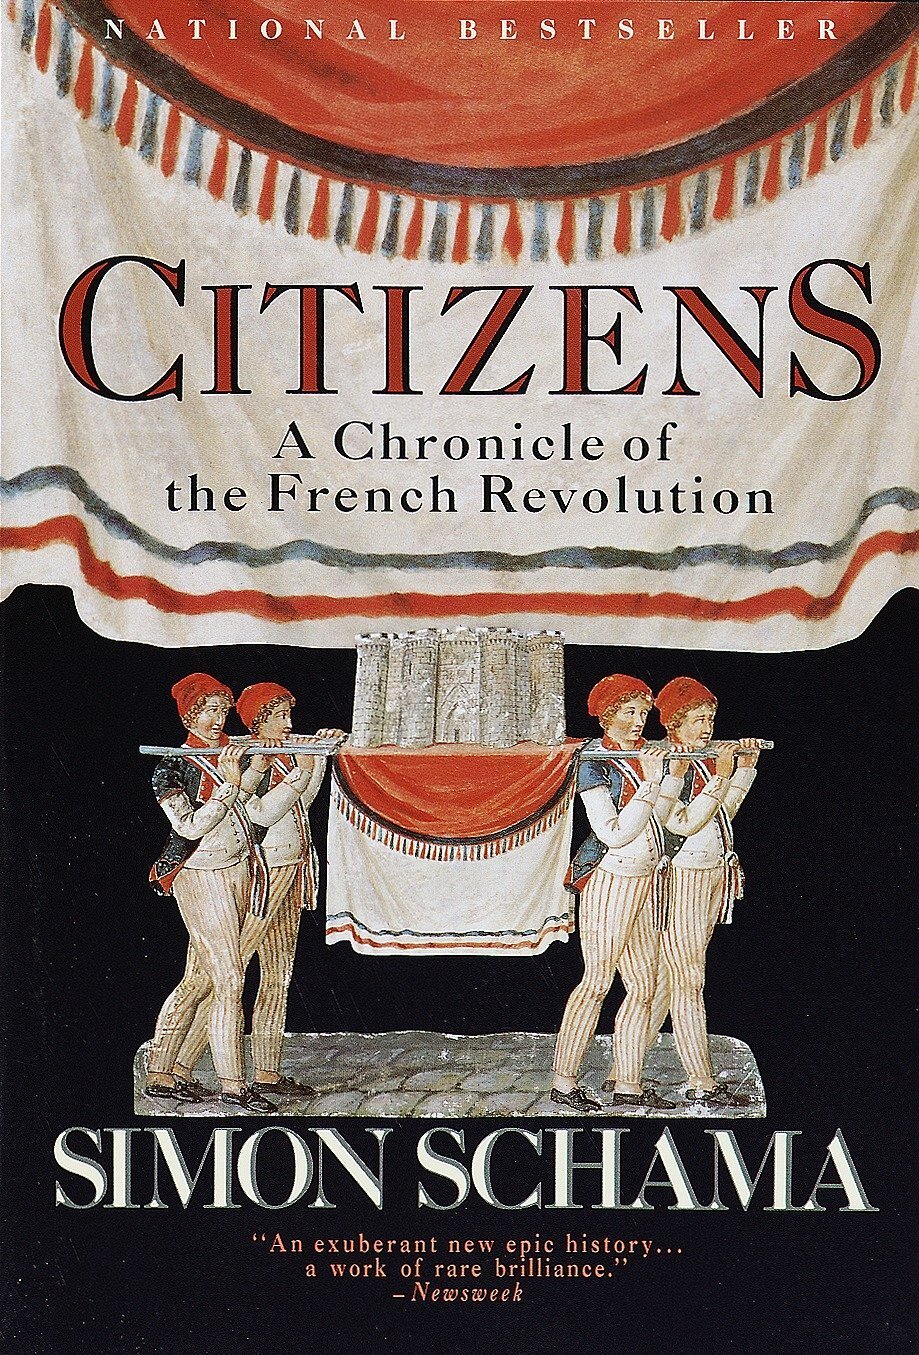 —　Revolution　Bookstore-Cafe　Midtown　of　Chronicle　A　French　Scholar　Citizens:　the